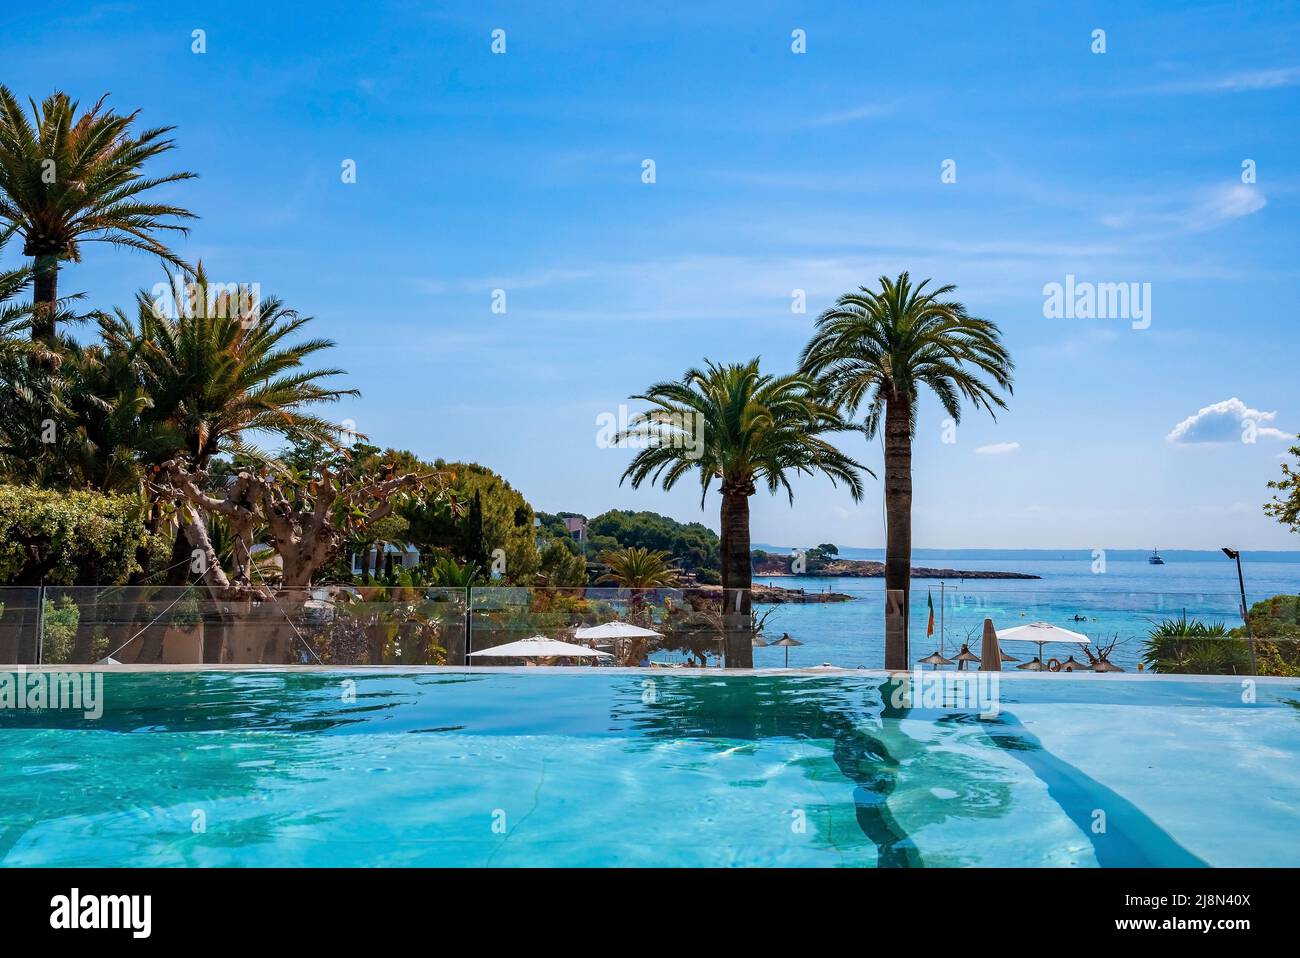 Swimming pool with view of trees and seascape against blue sky Stock Photo